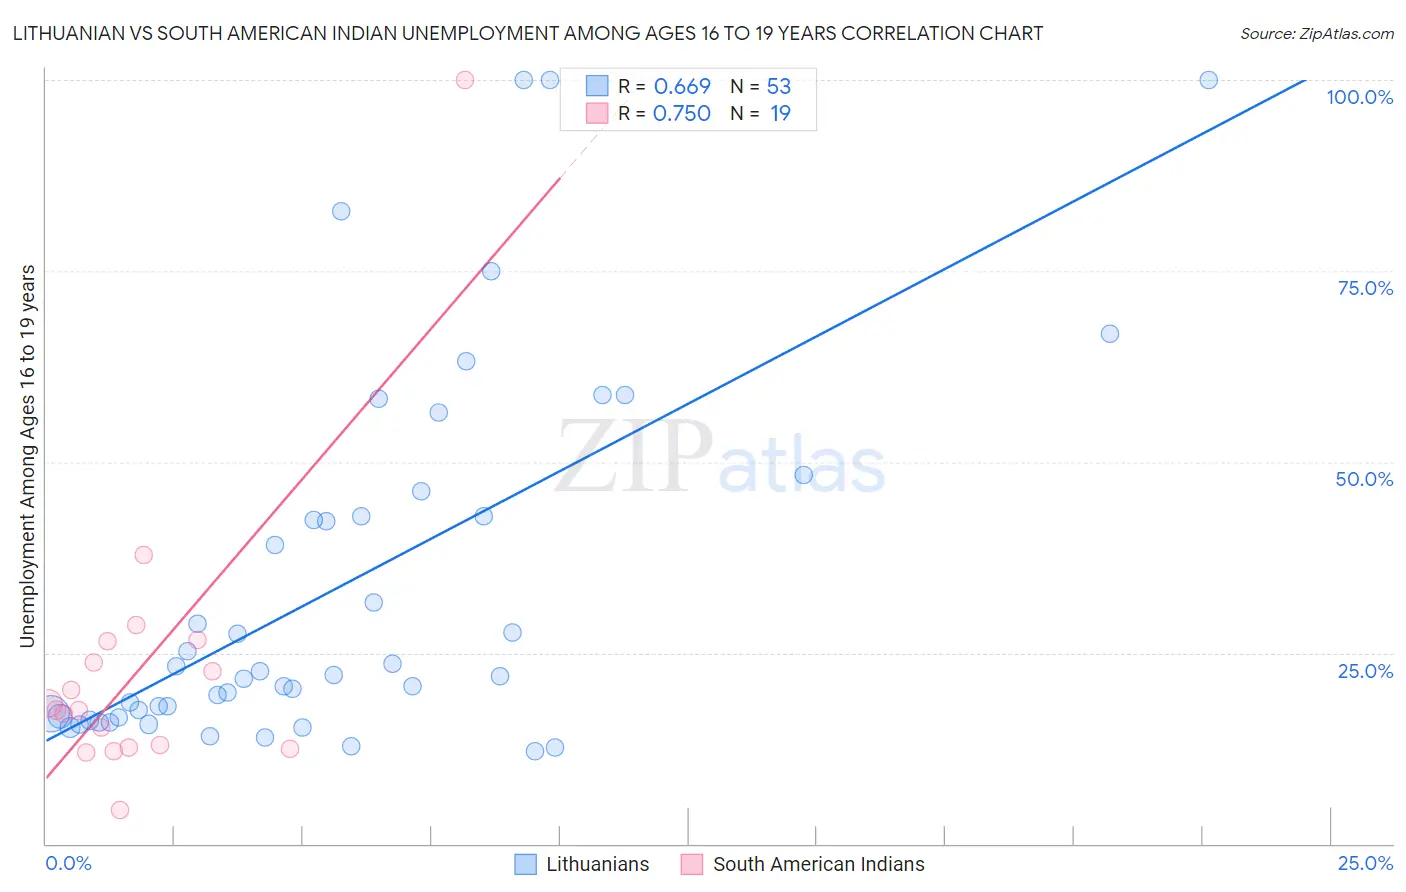 Lithuanian vs South American Indian Unemployment Among Ages 16 to 19 years